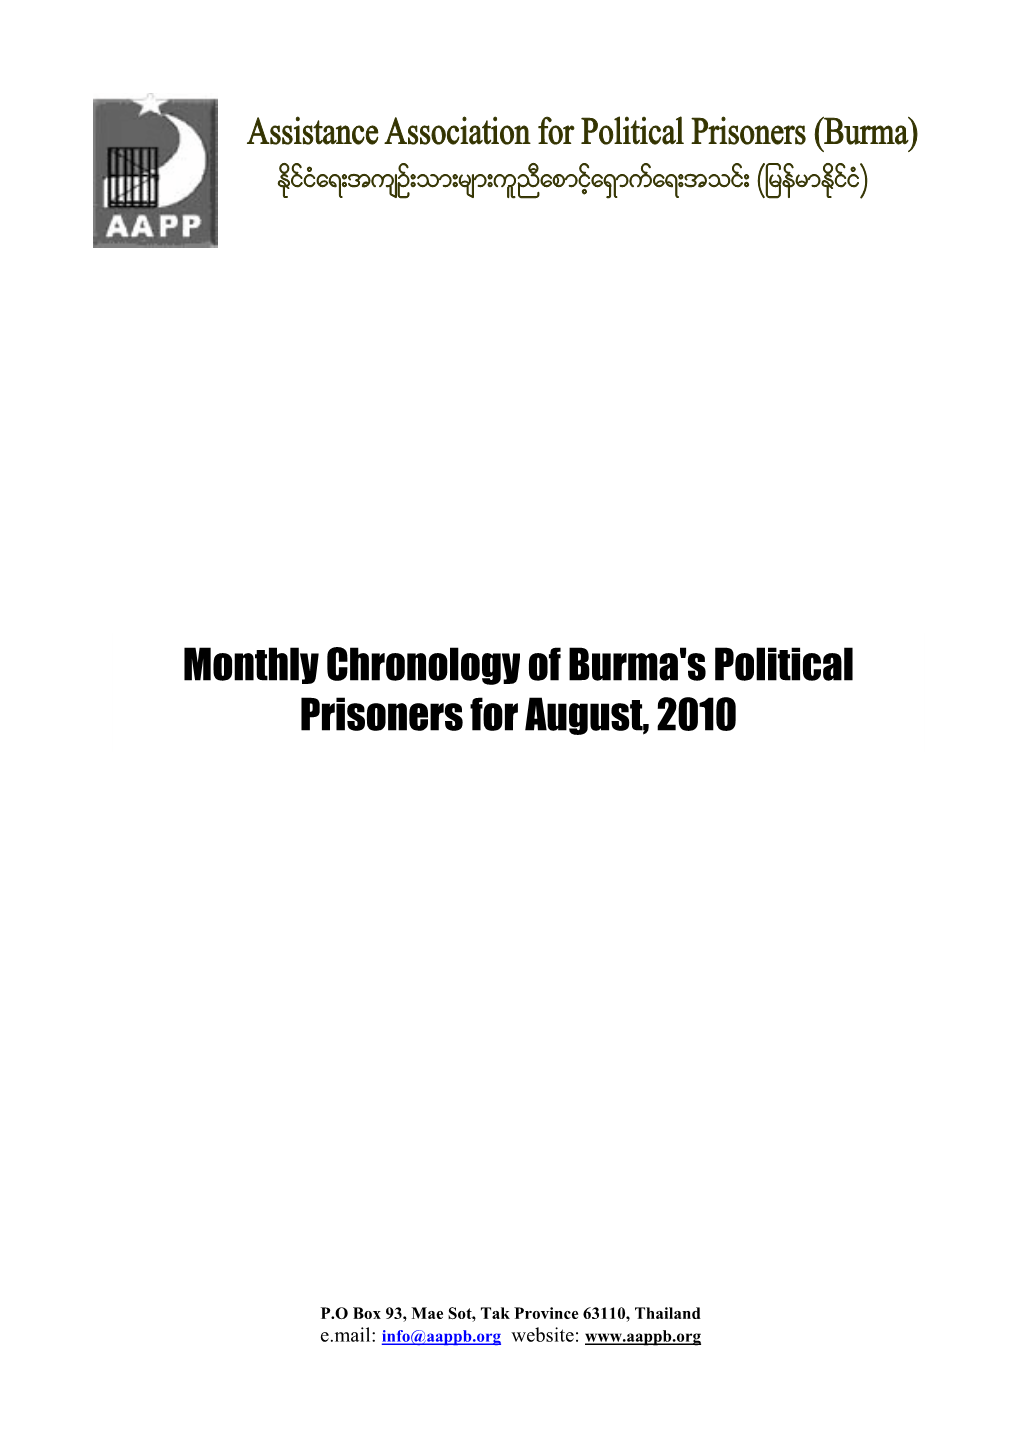 Monthly Chronology of Burma's Political Prisoners for August, 2010